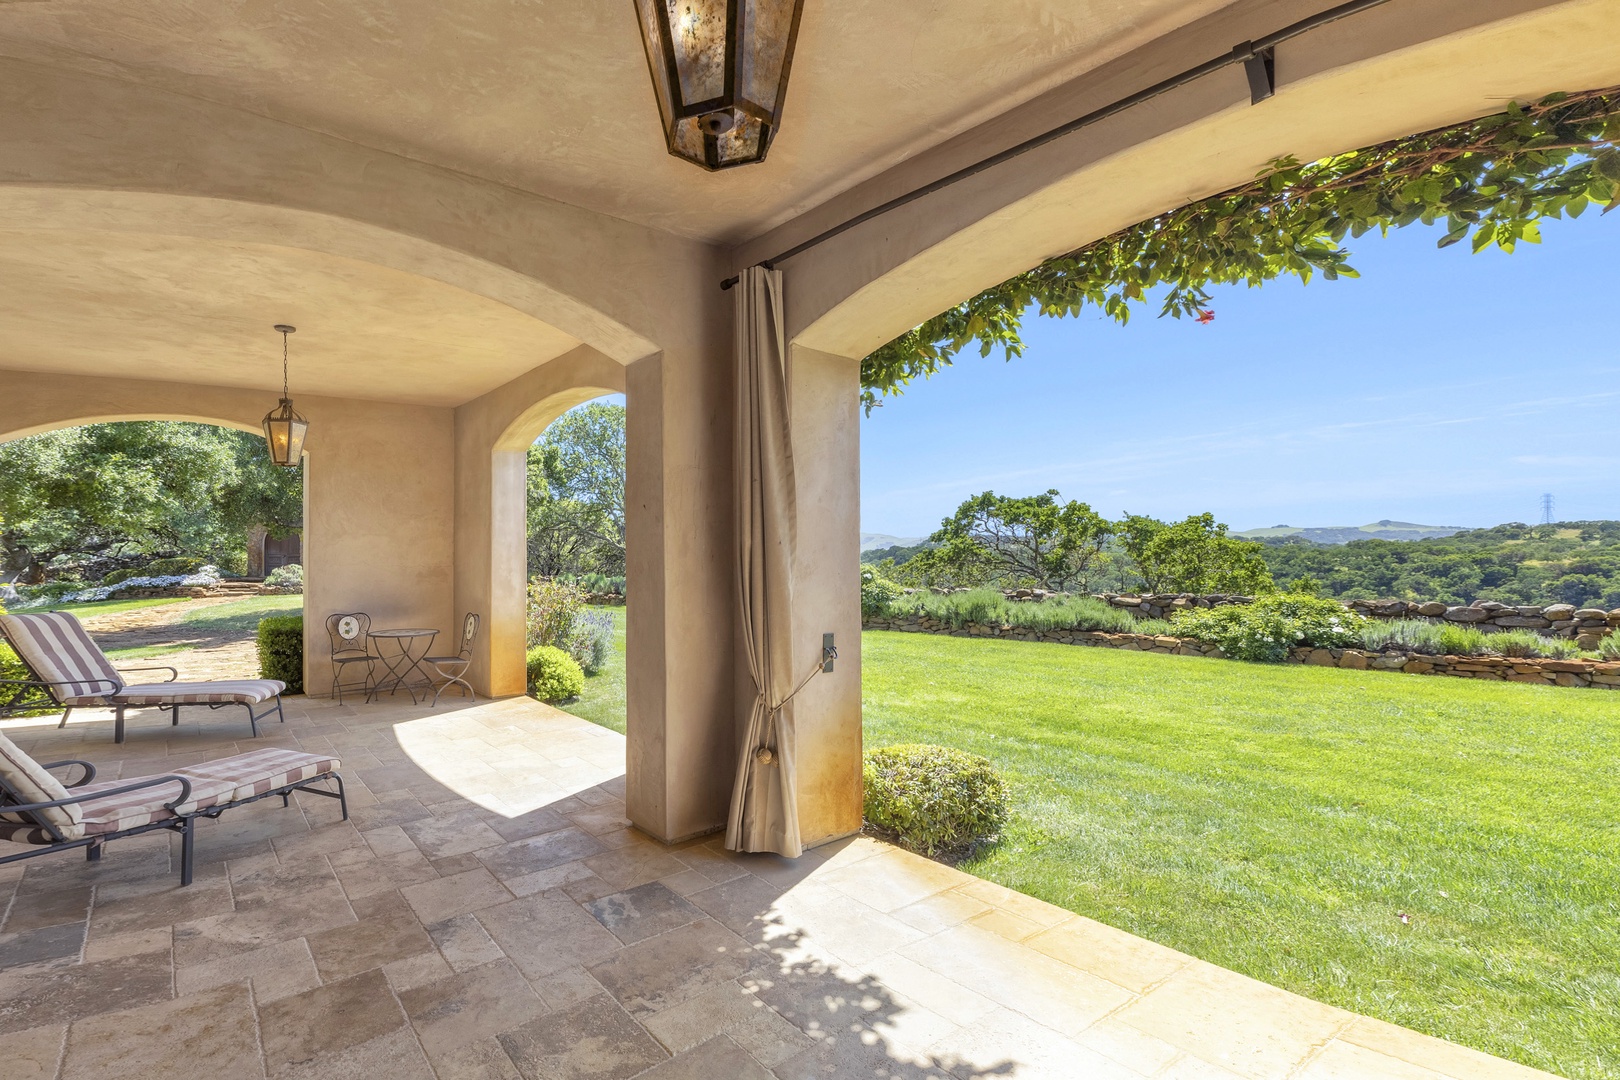 Fairfield Vacation Rentals, Villa Capricho - Gorgeous lawn and expansive views from the large covered backyard patio